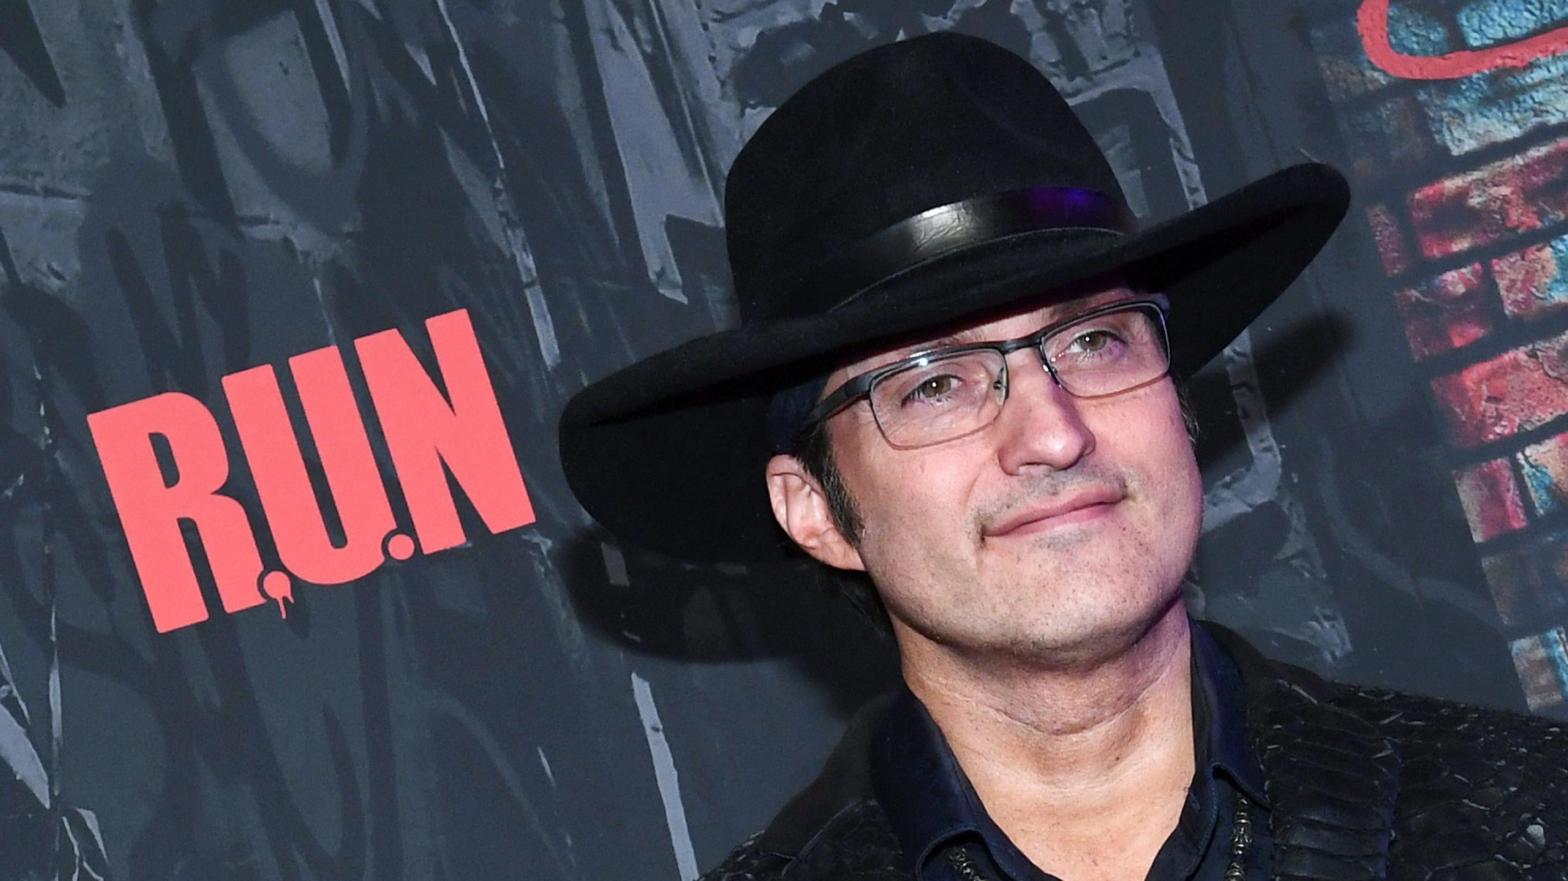 In this photo from 2019, Robert Rodriguez attends the opening night of Cirque du Soleil's R.U.N. in Las Vegas, Nevada. (Photo: Ethan Miller/Getty Images for Cirque du Soleil, Getty Images)